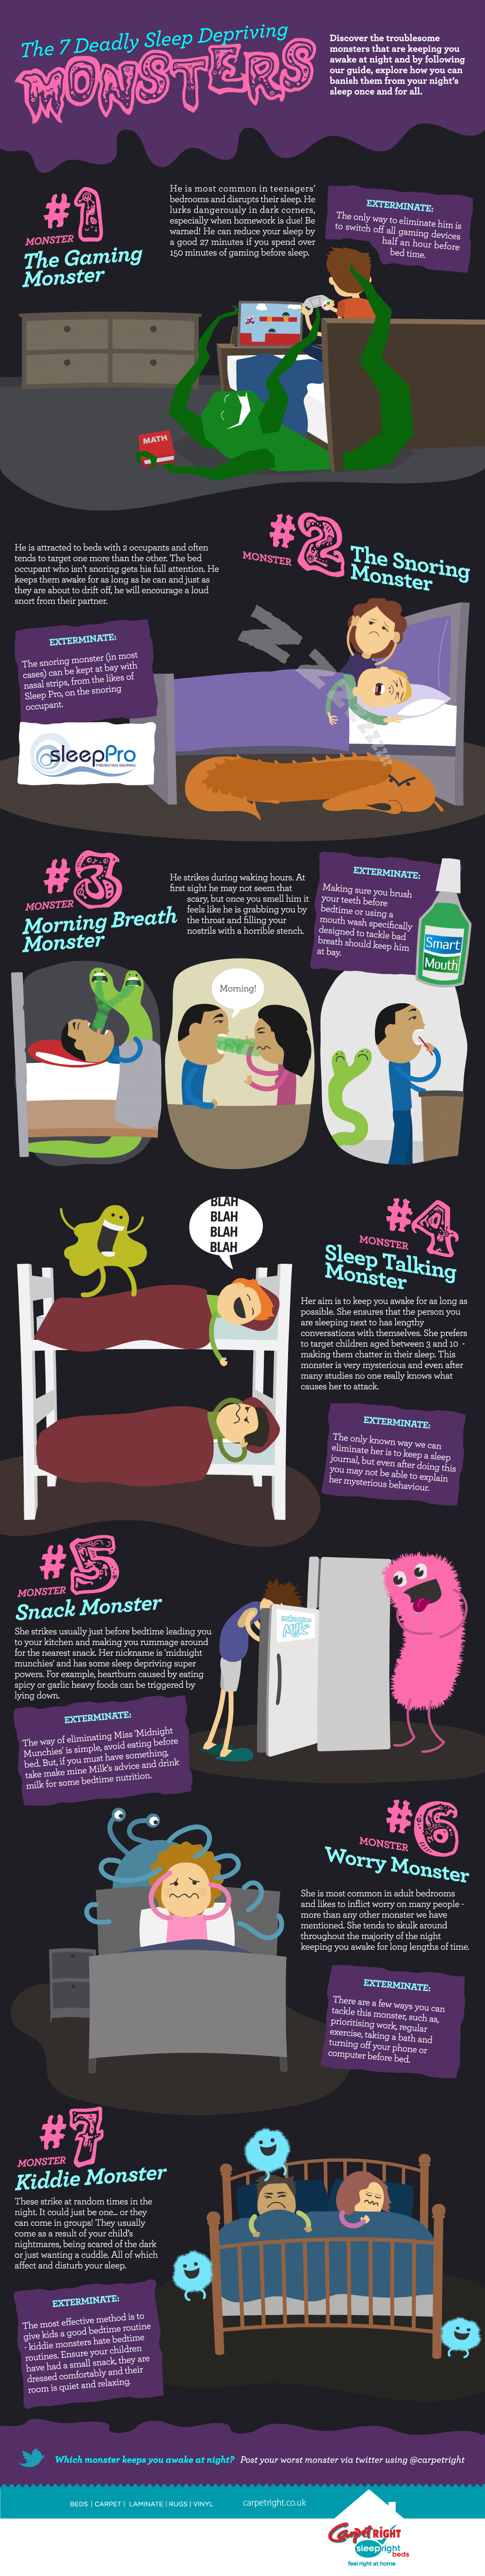 The 7 Deadly Sleep Depriving Monsters